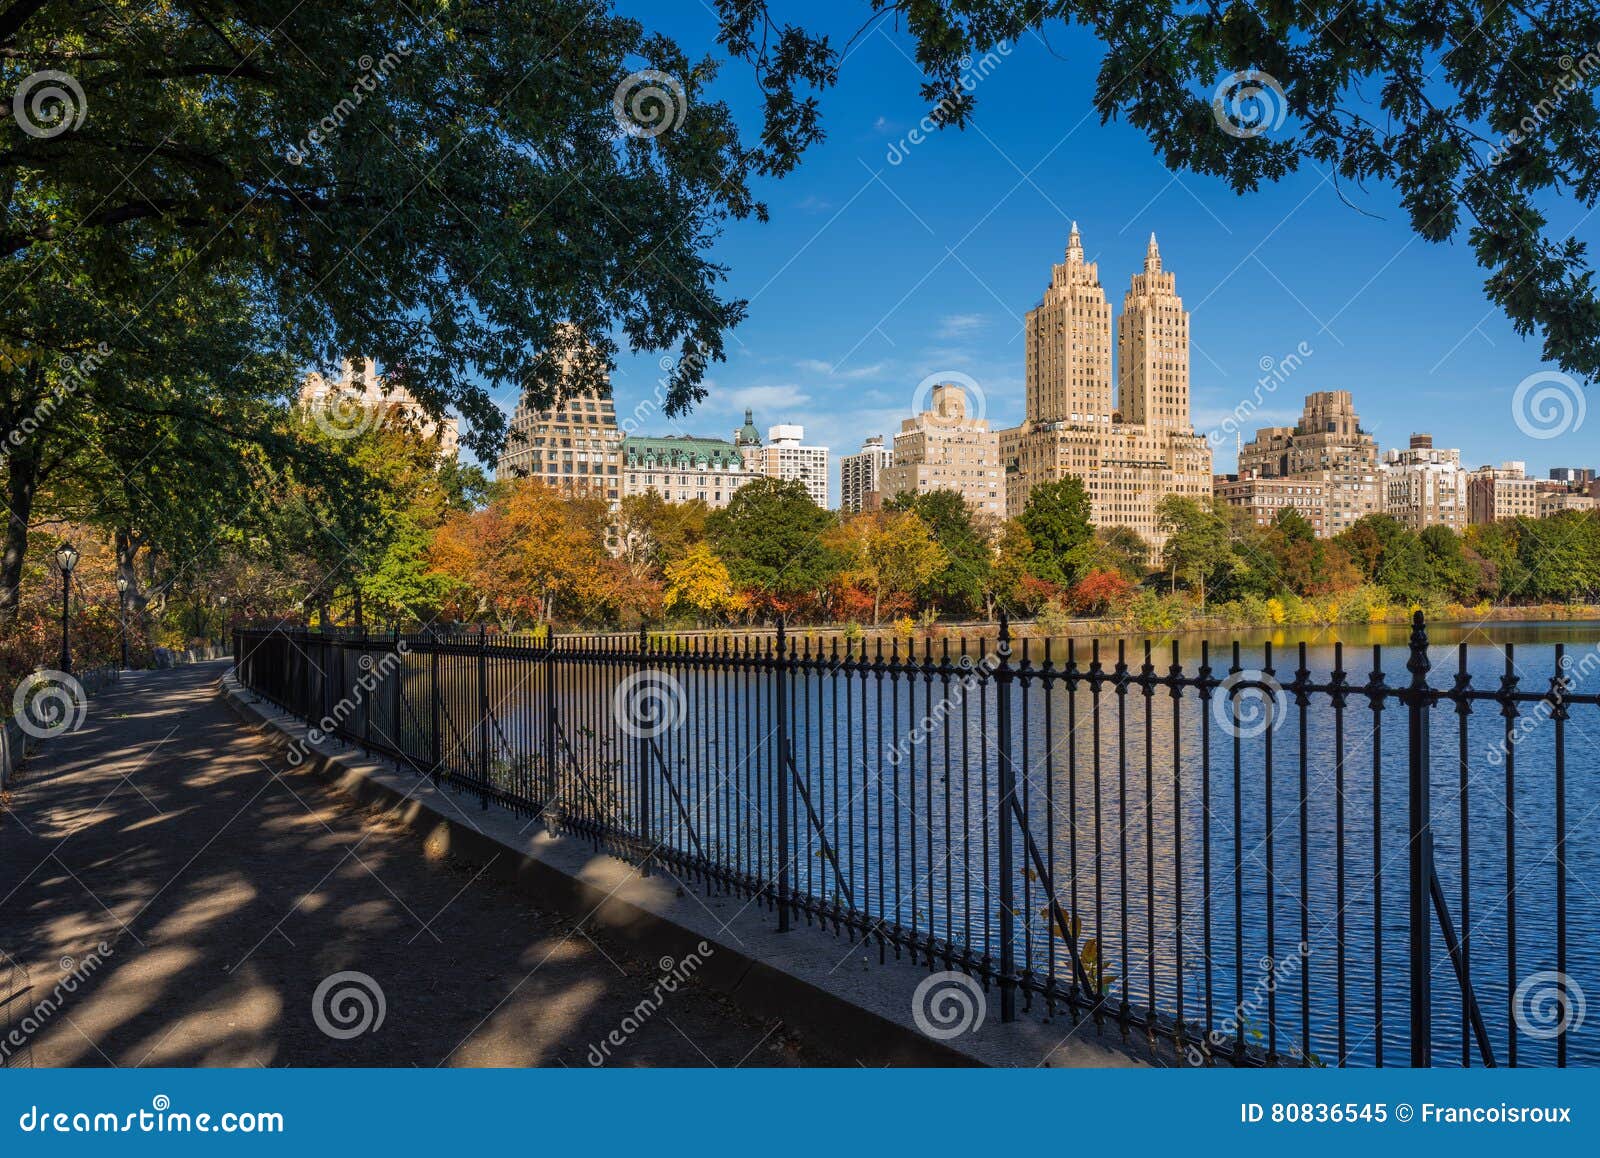 upper west side and central park reservoir, fall foliage. manhattan